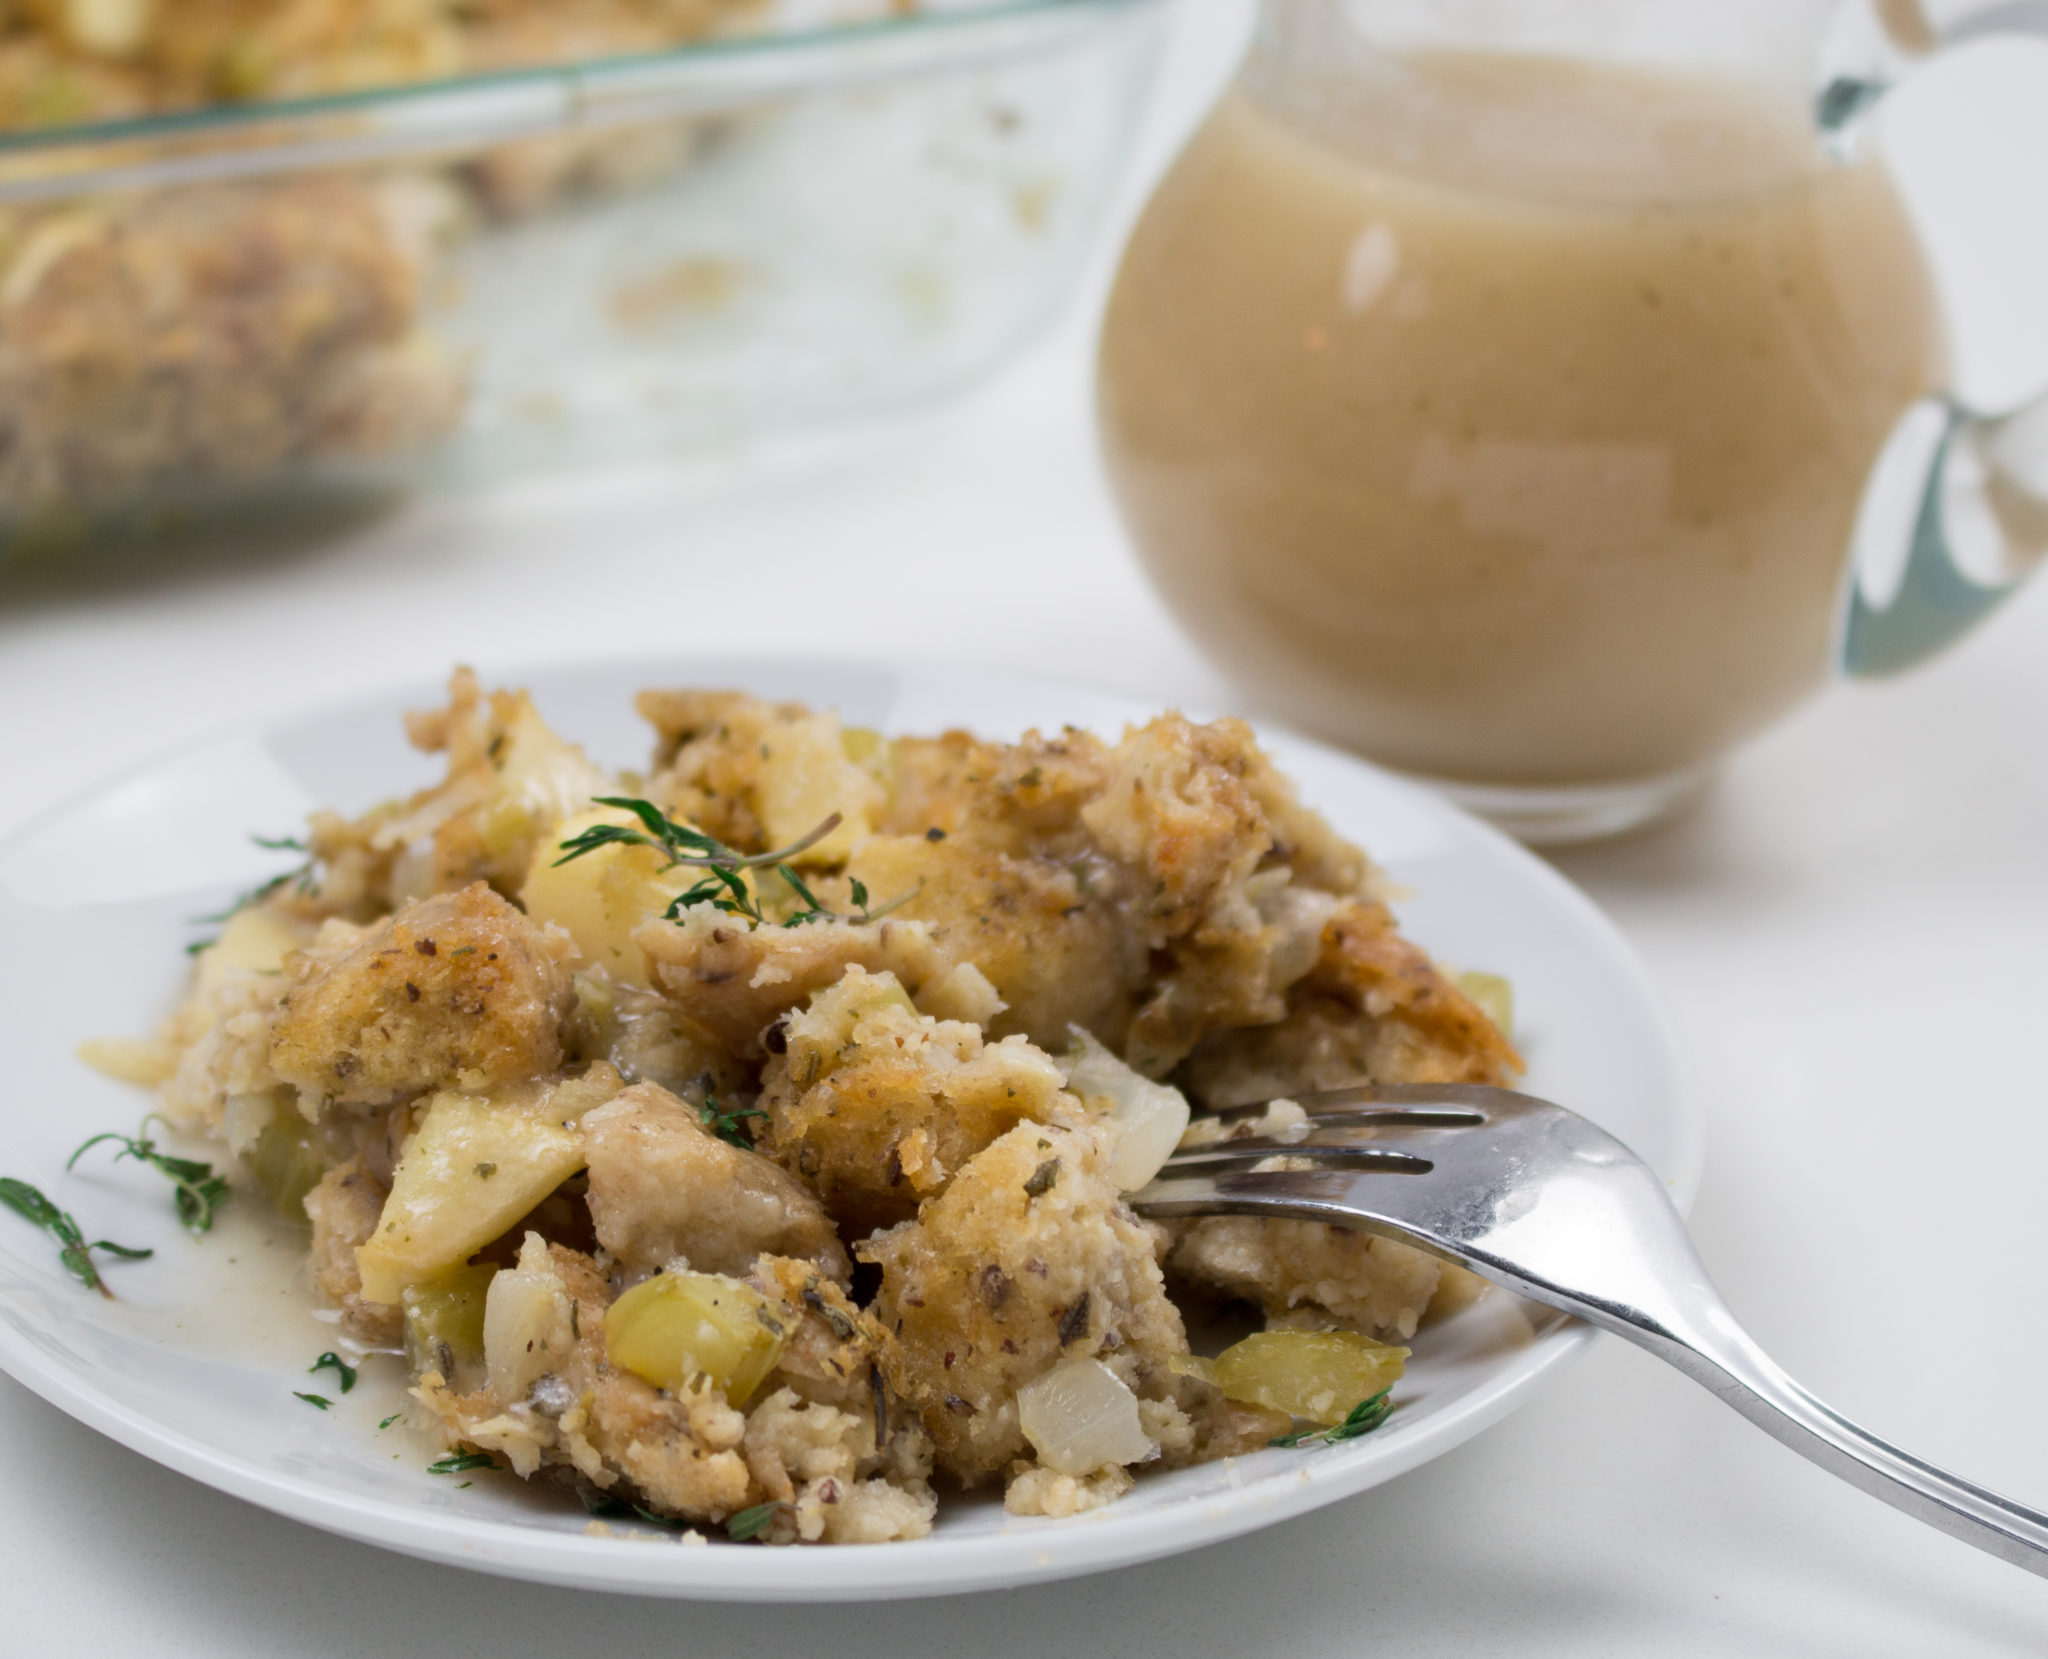 Gluten-free stuffing is an iconic holiday side to be savored all year long. Versatile and delicious www.veganglutenfreelife.com/gluten-free-stuffing/